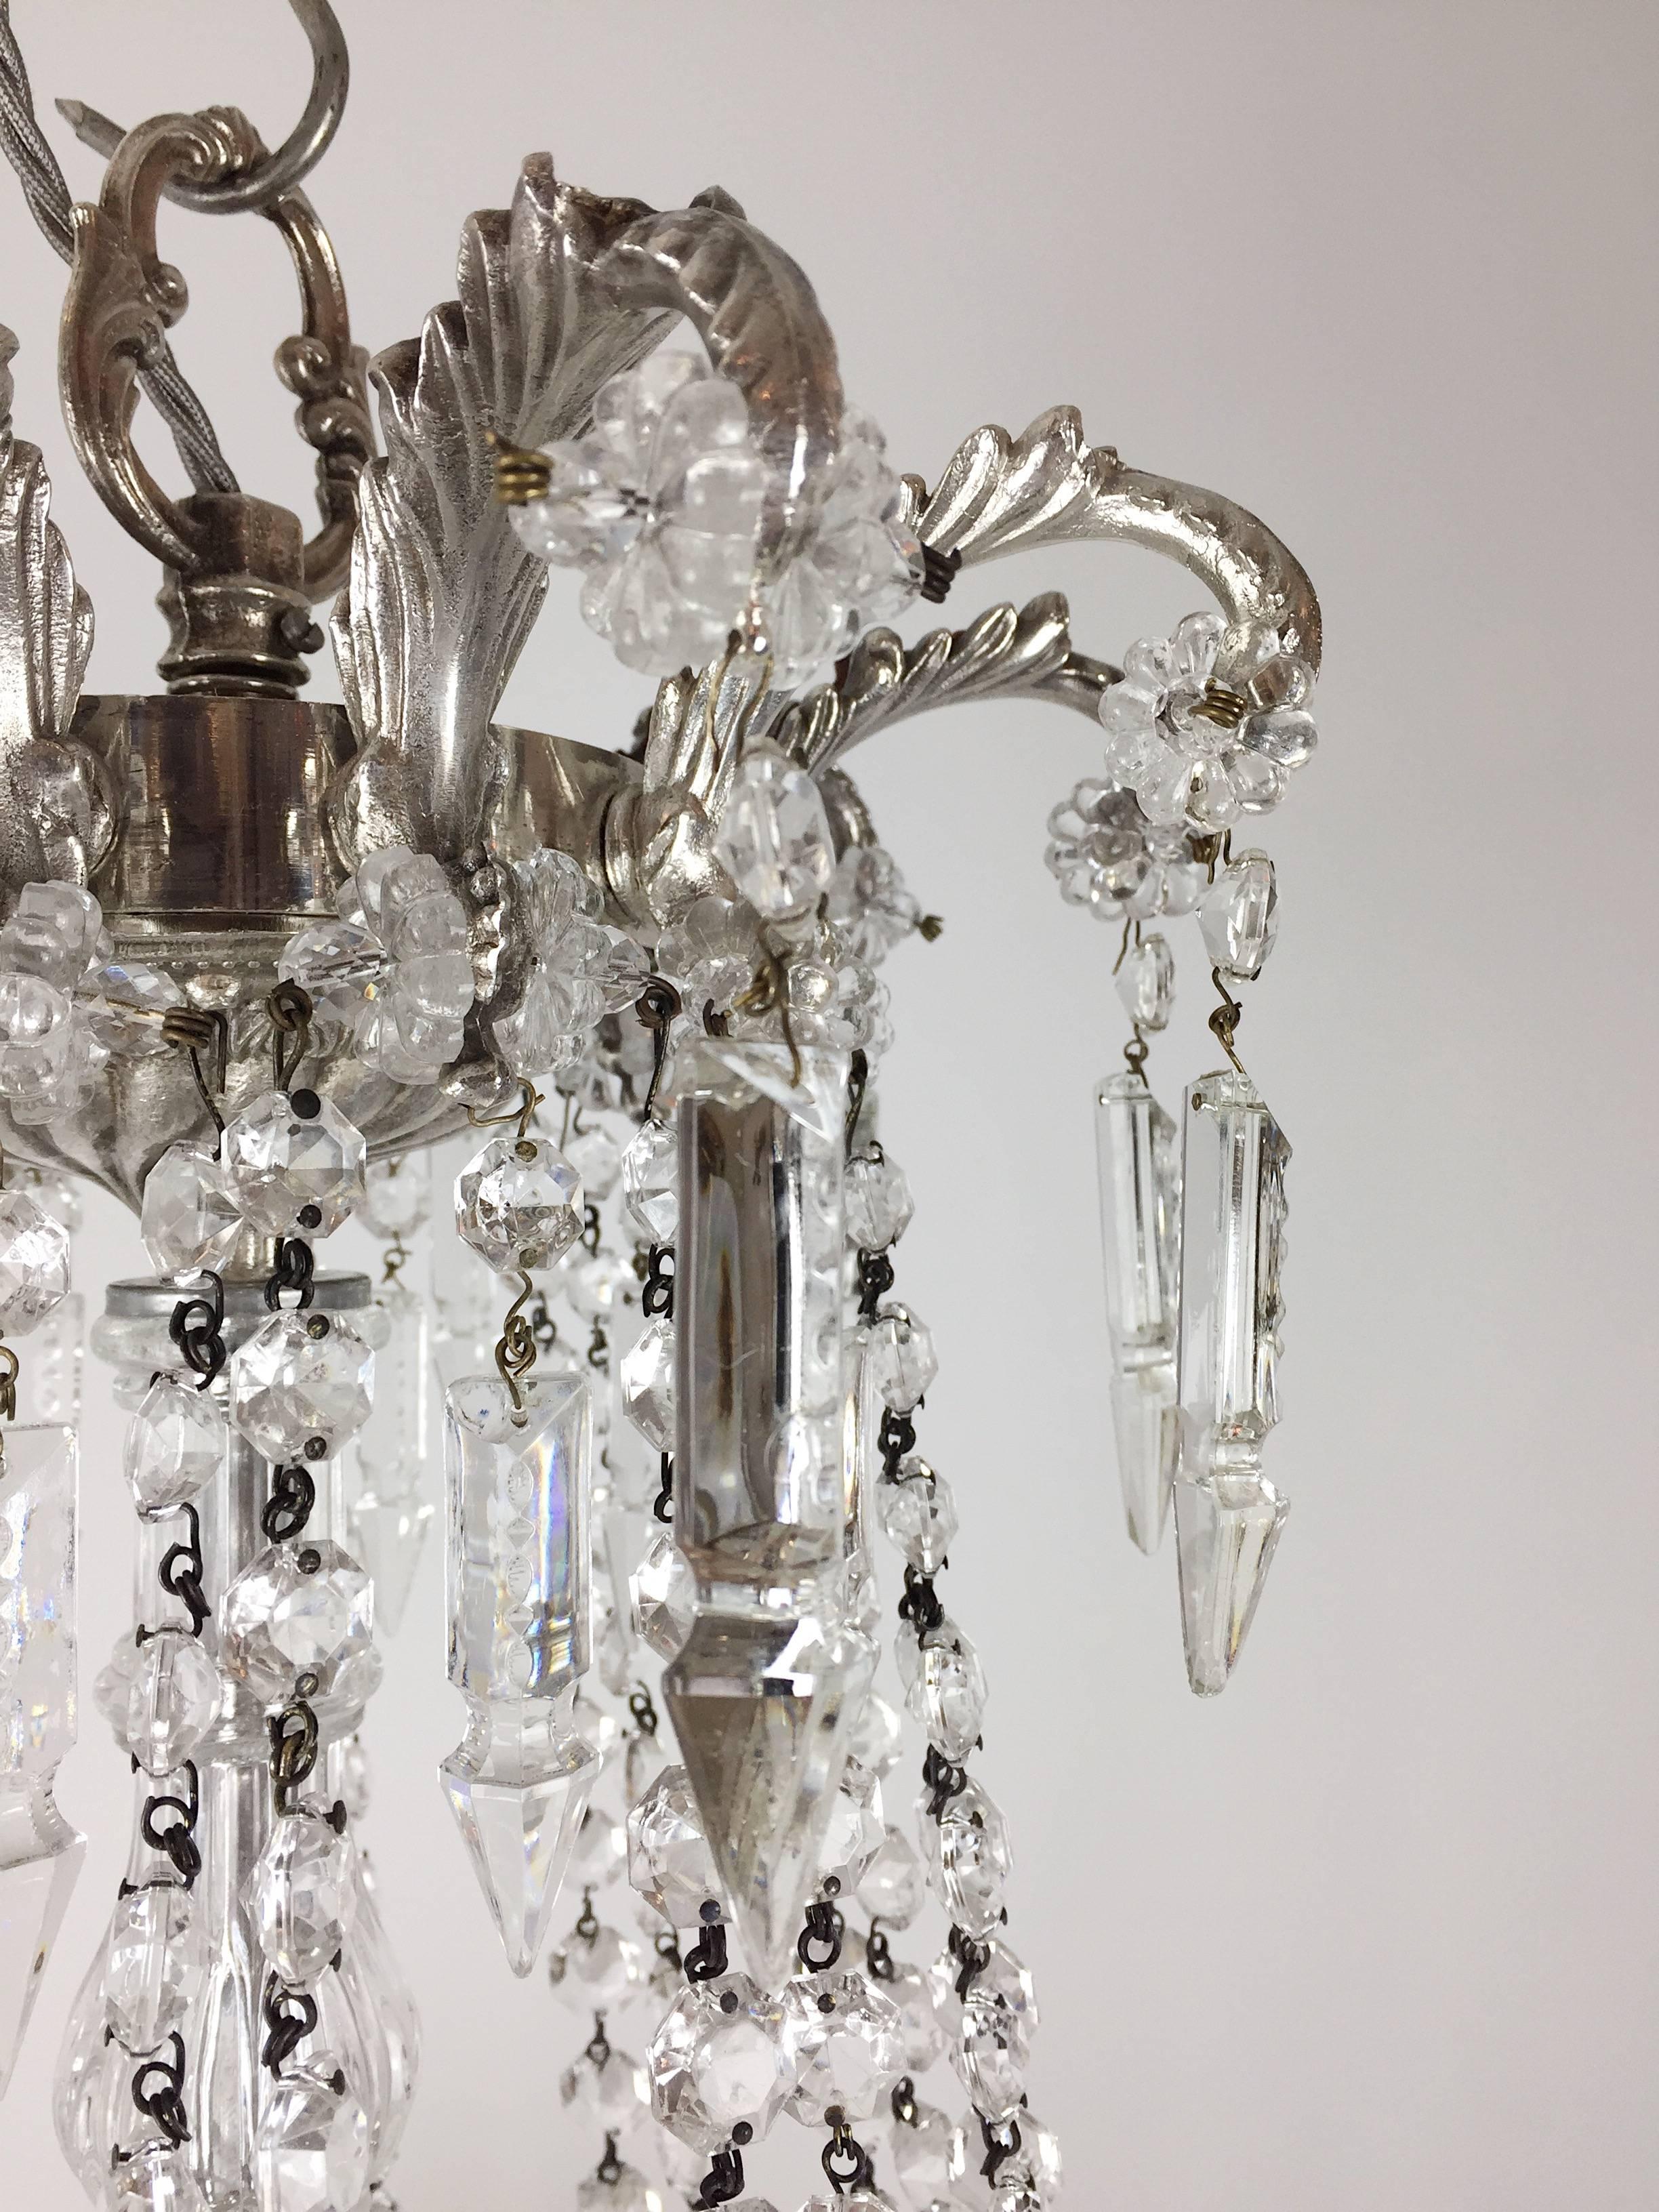 A pair of late 19th century silvered brass bag and swag chandeliers, possibly Spanish, hung with hand-cut faceted buttons and icicle drops.